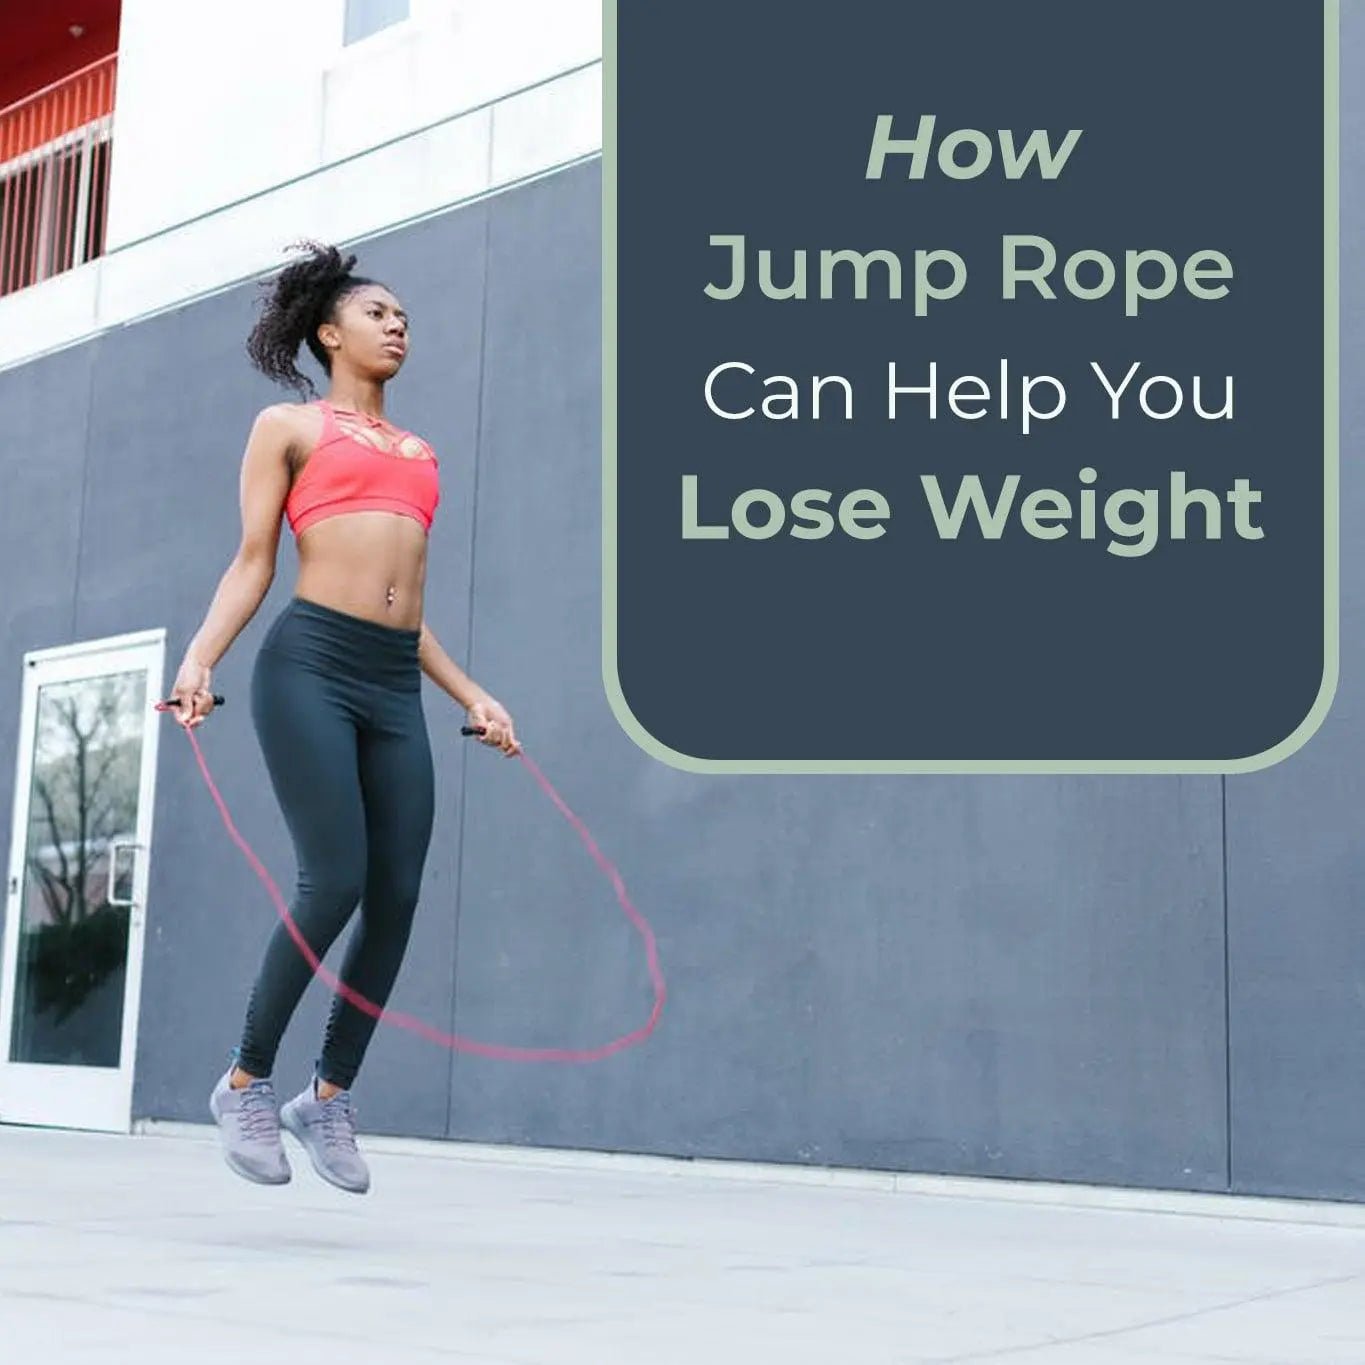 How to Lose Weight: Jump Rope Workout